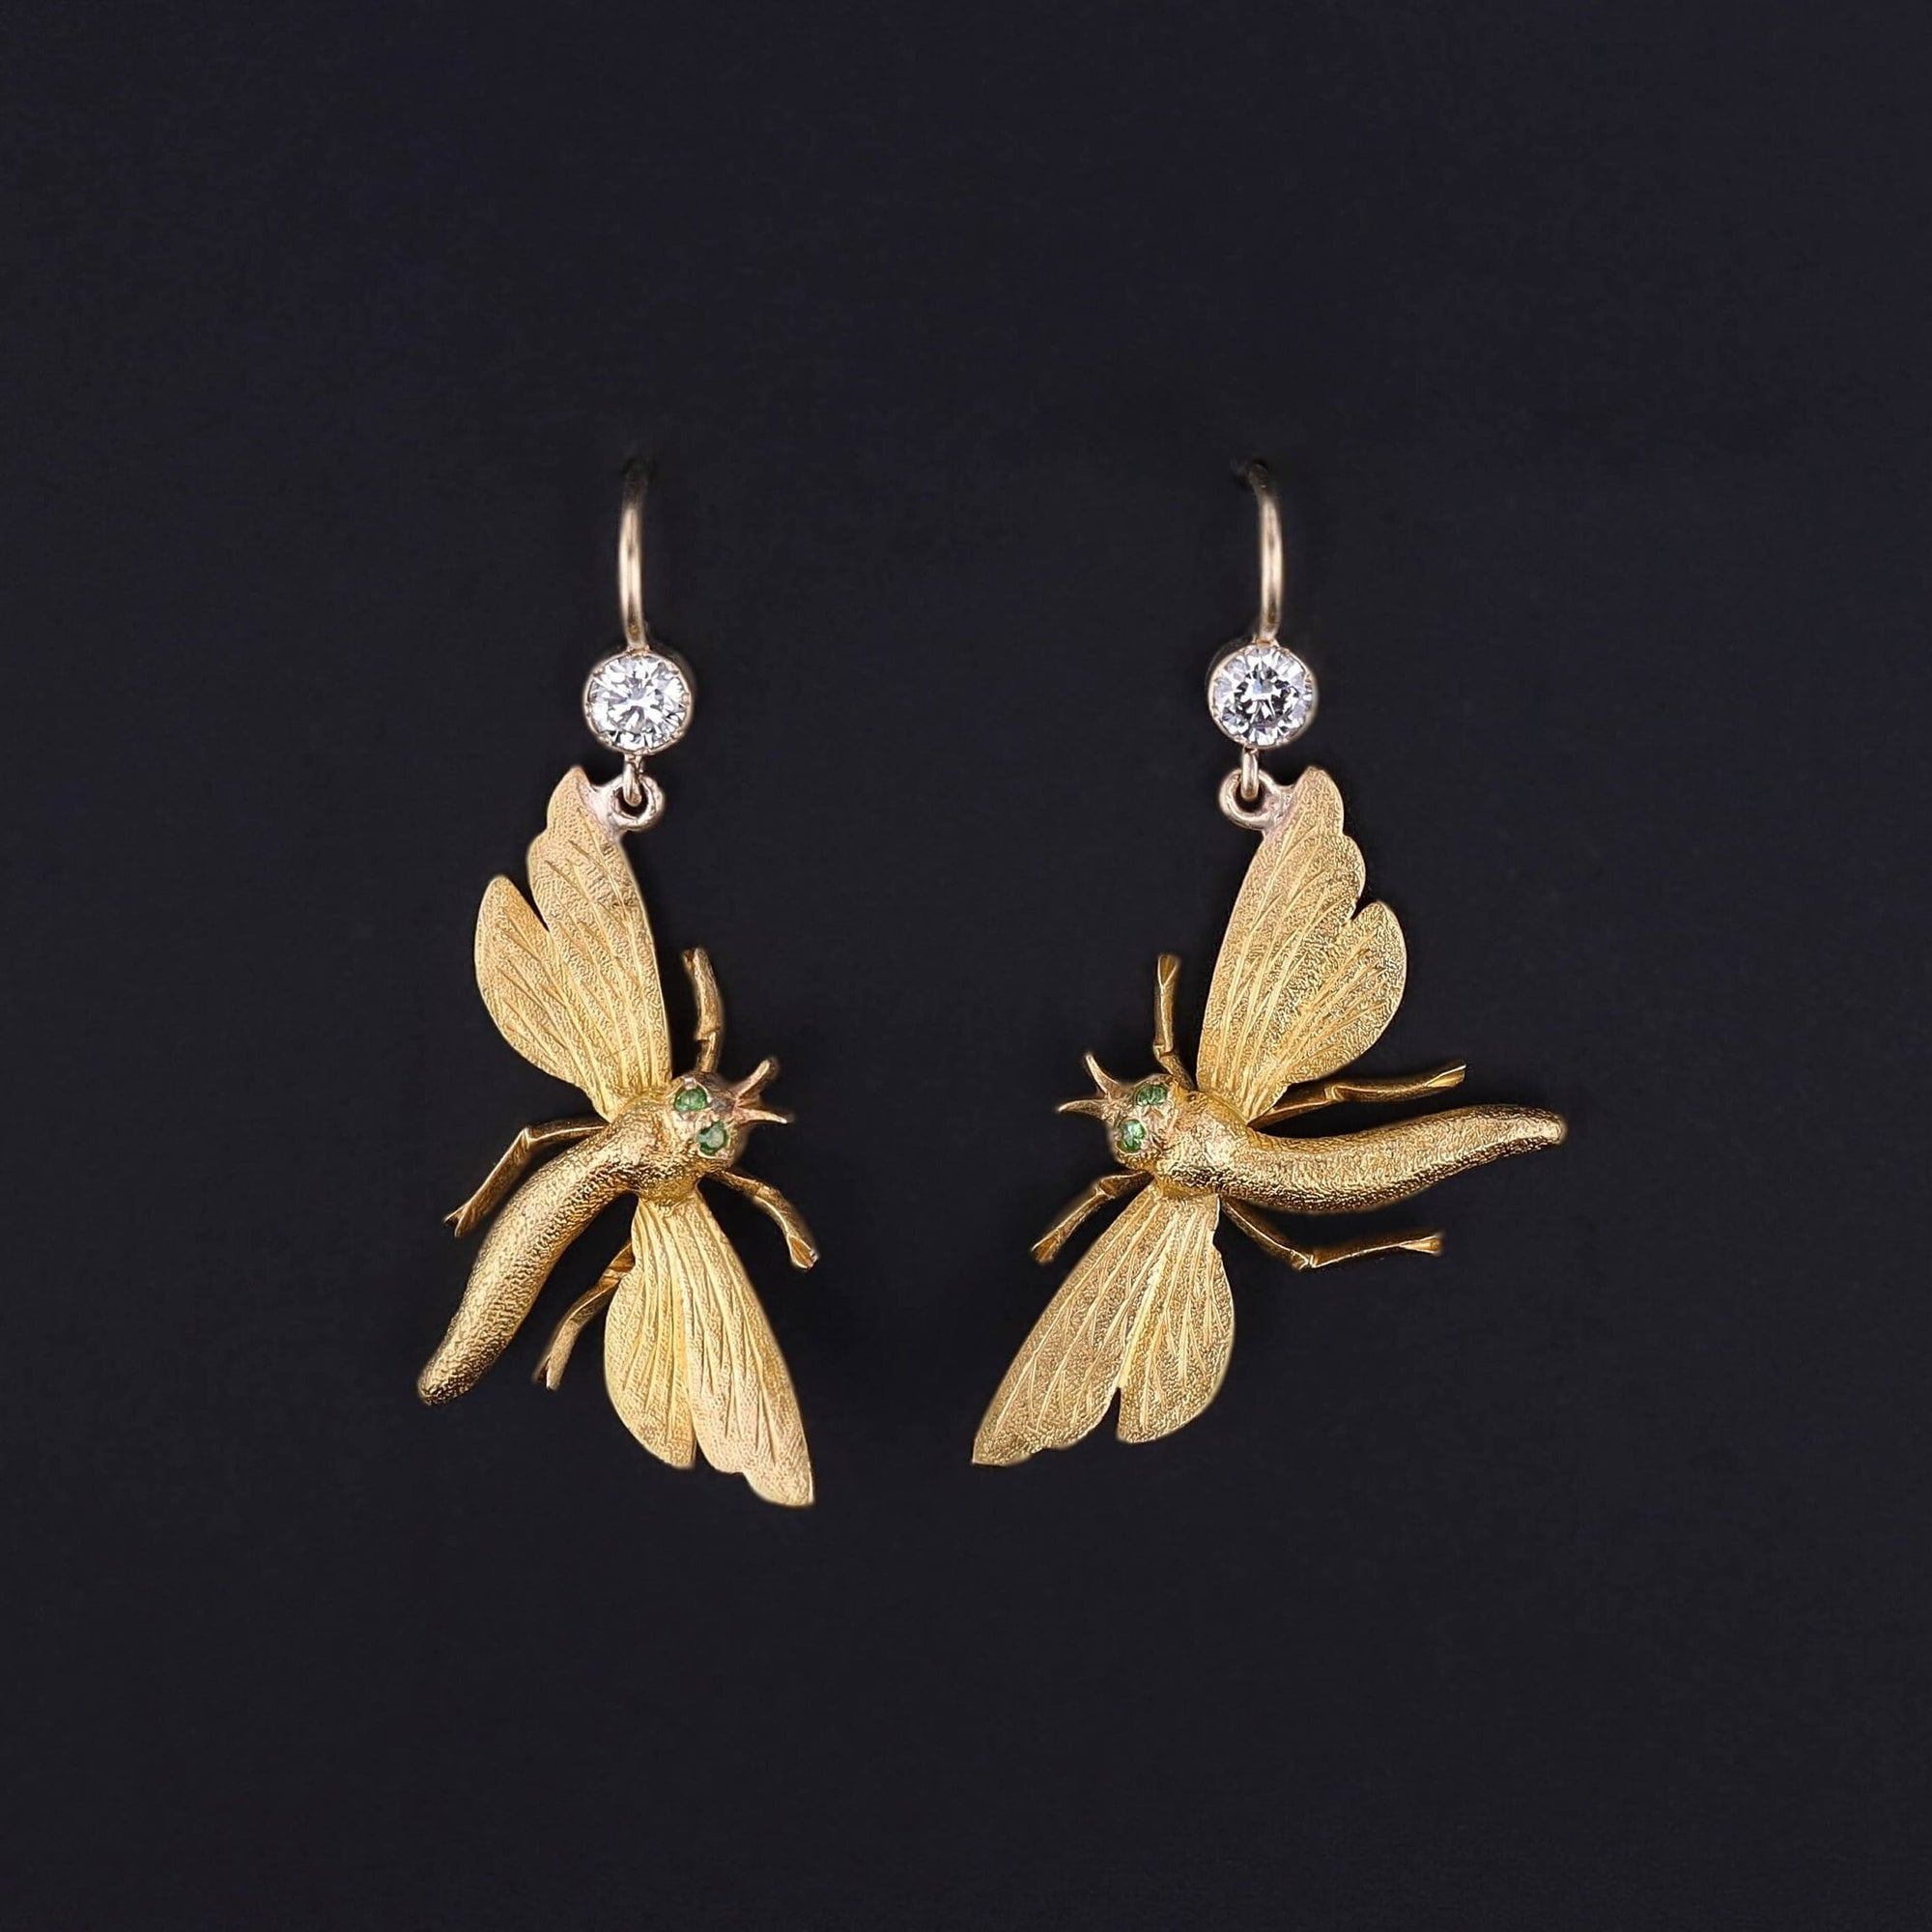 Antique Dragonfly Earrings of 14k Gold